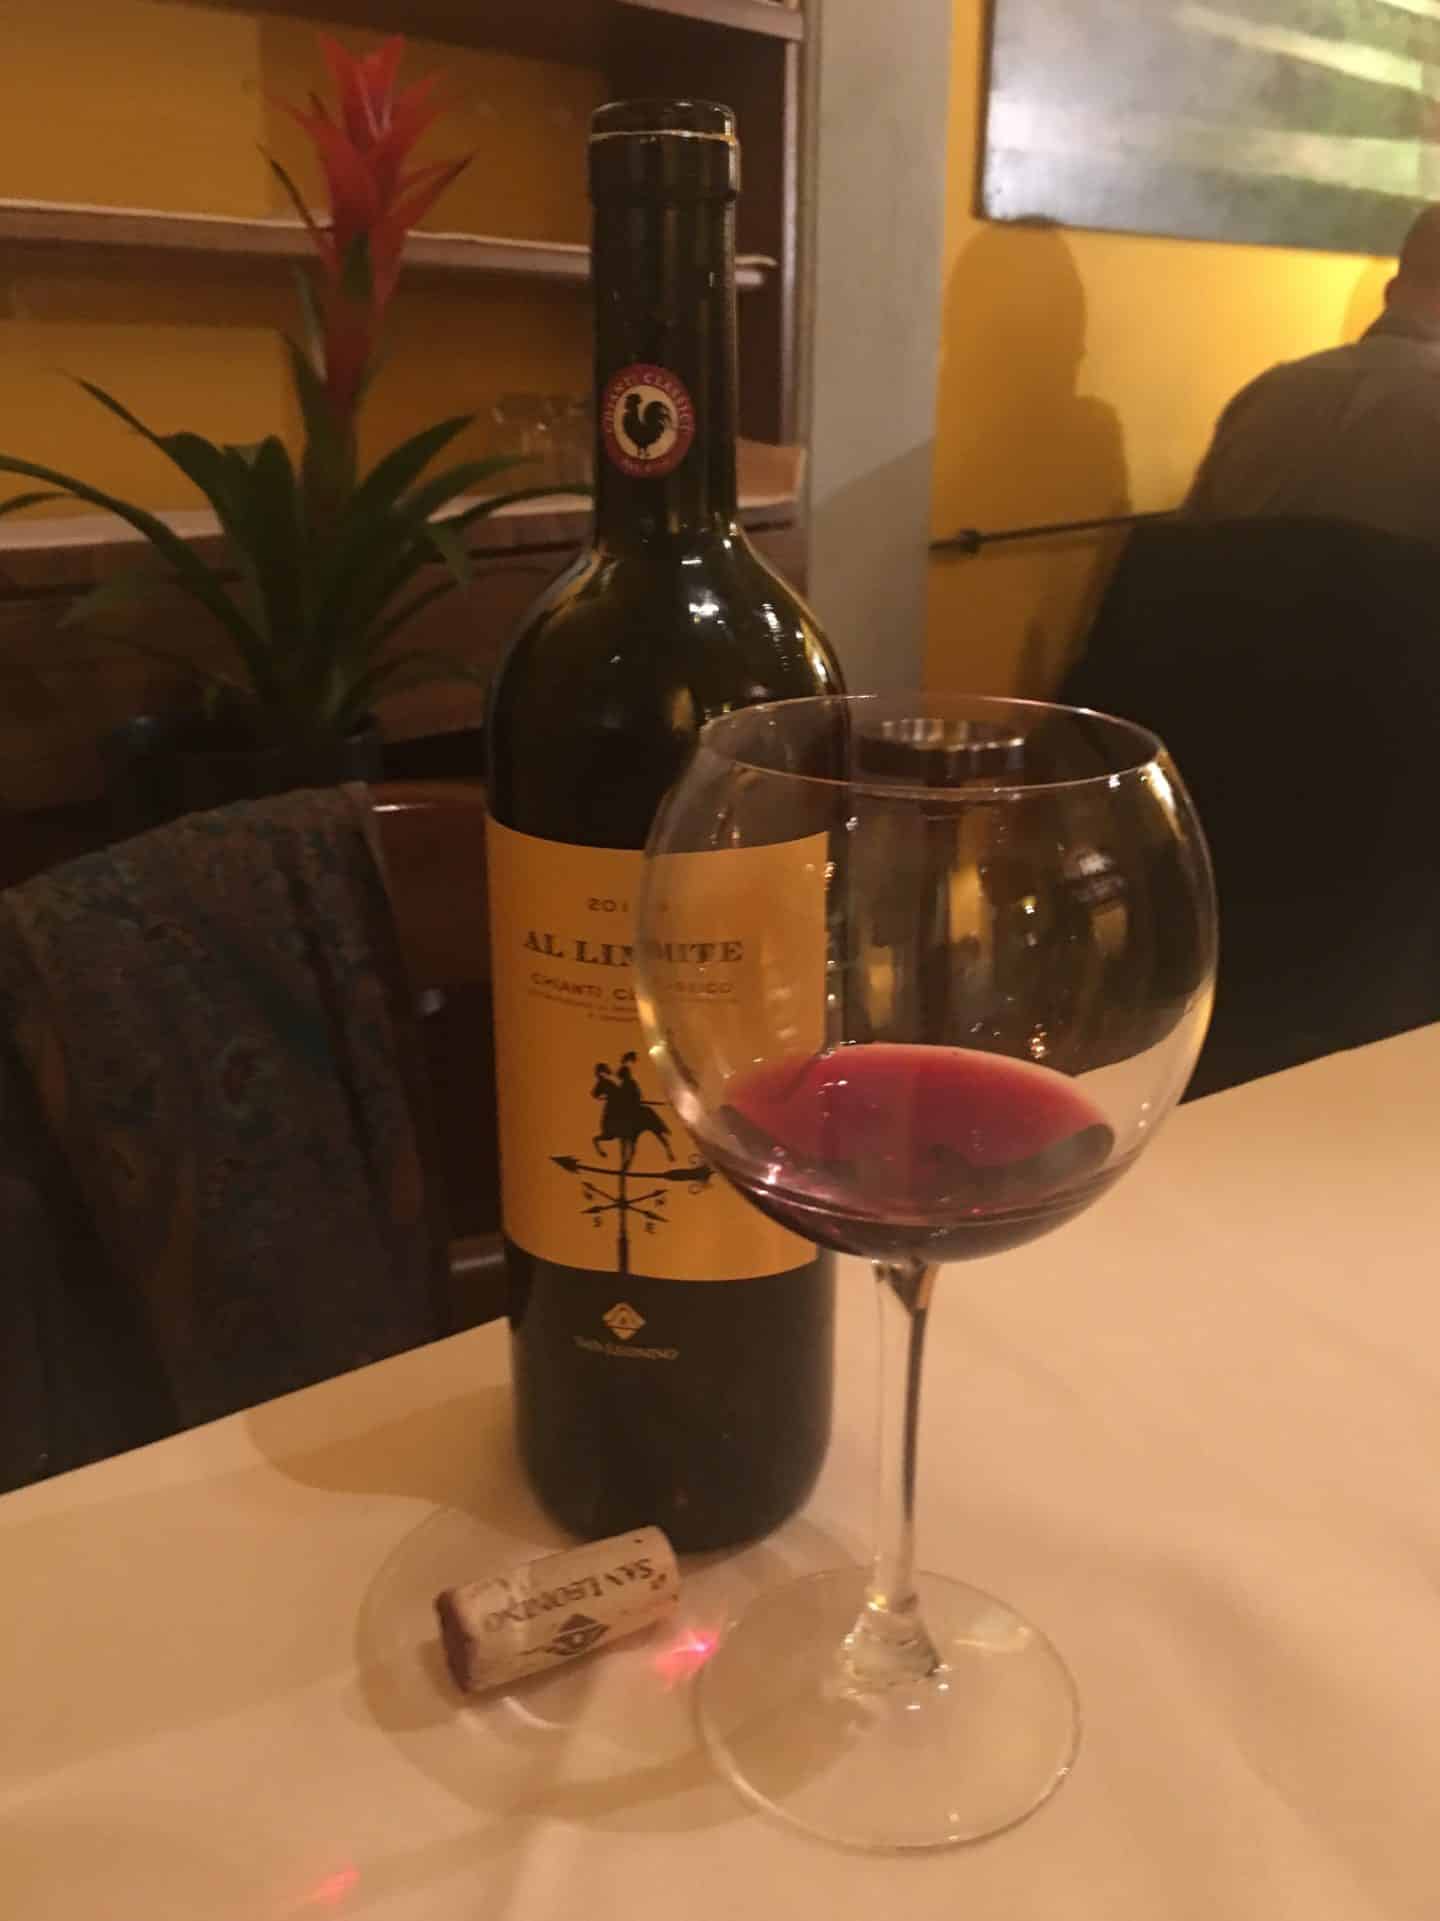 Fine dining restaurants in Florence - A bottle of red wine and a glass at Parione.